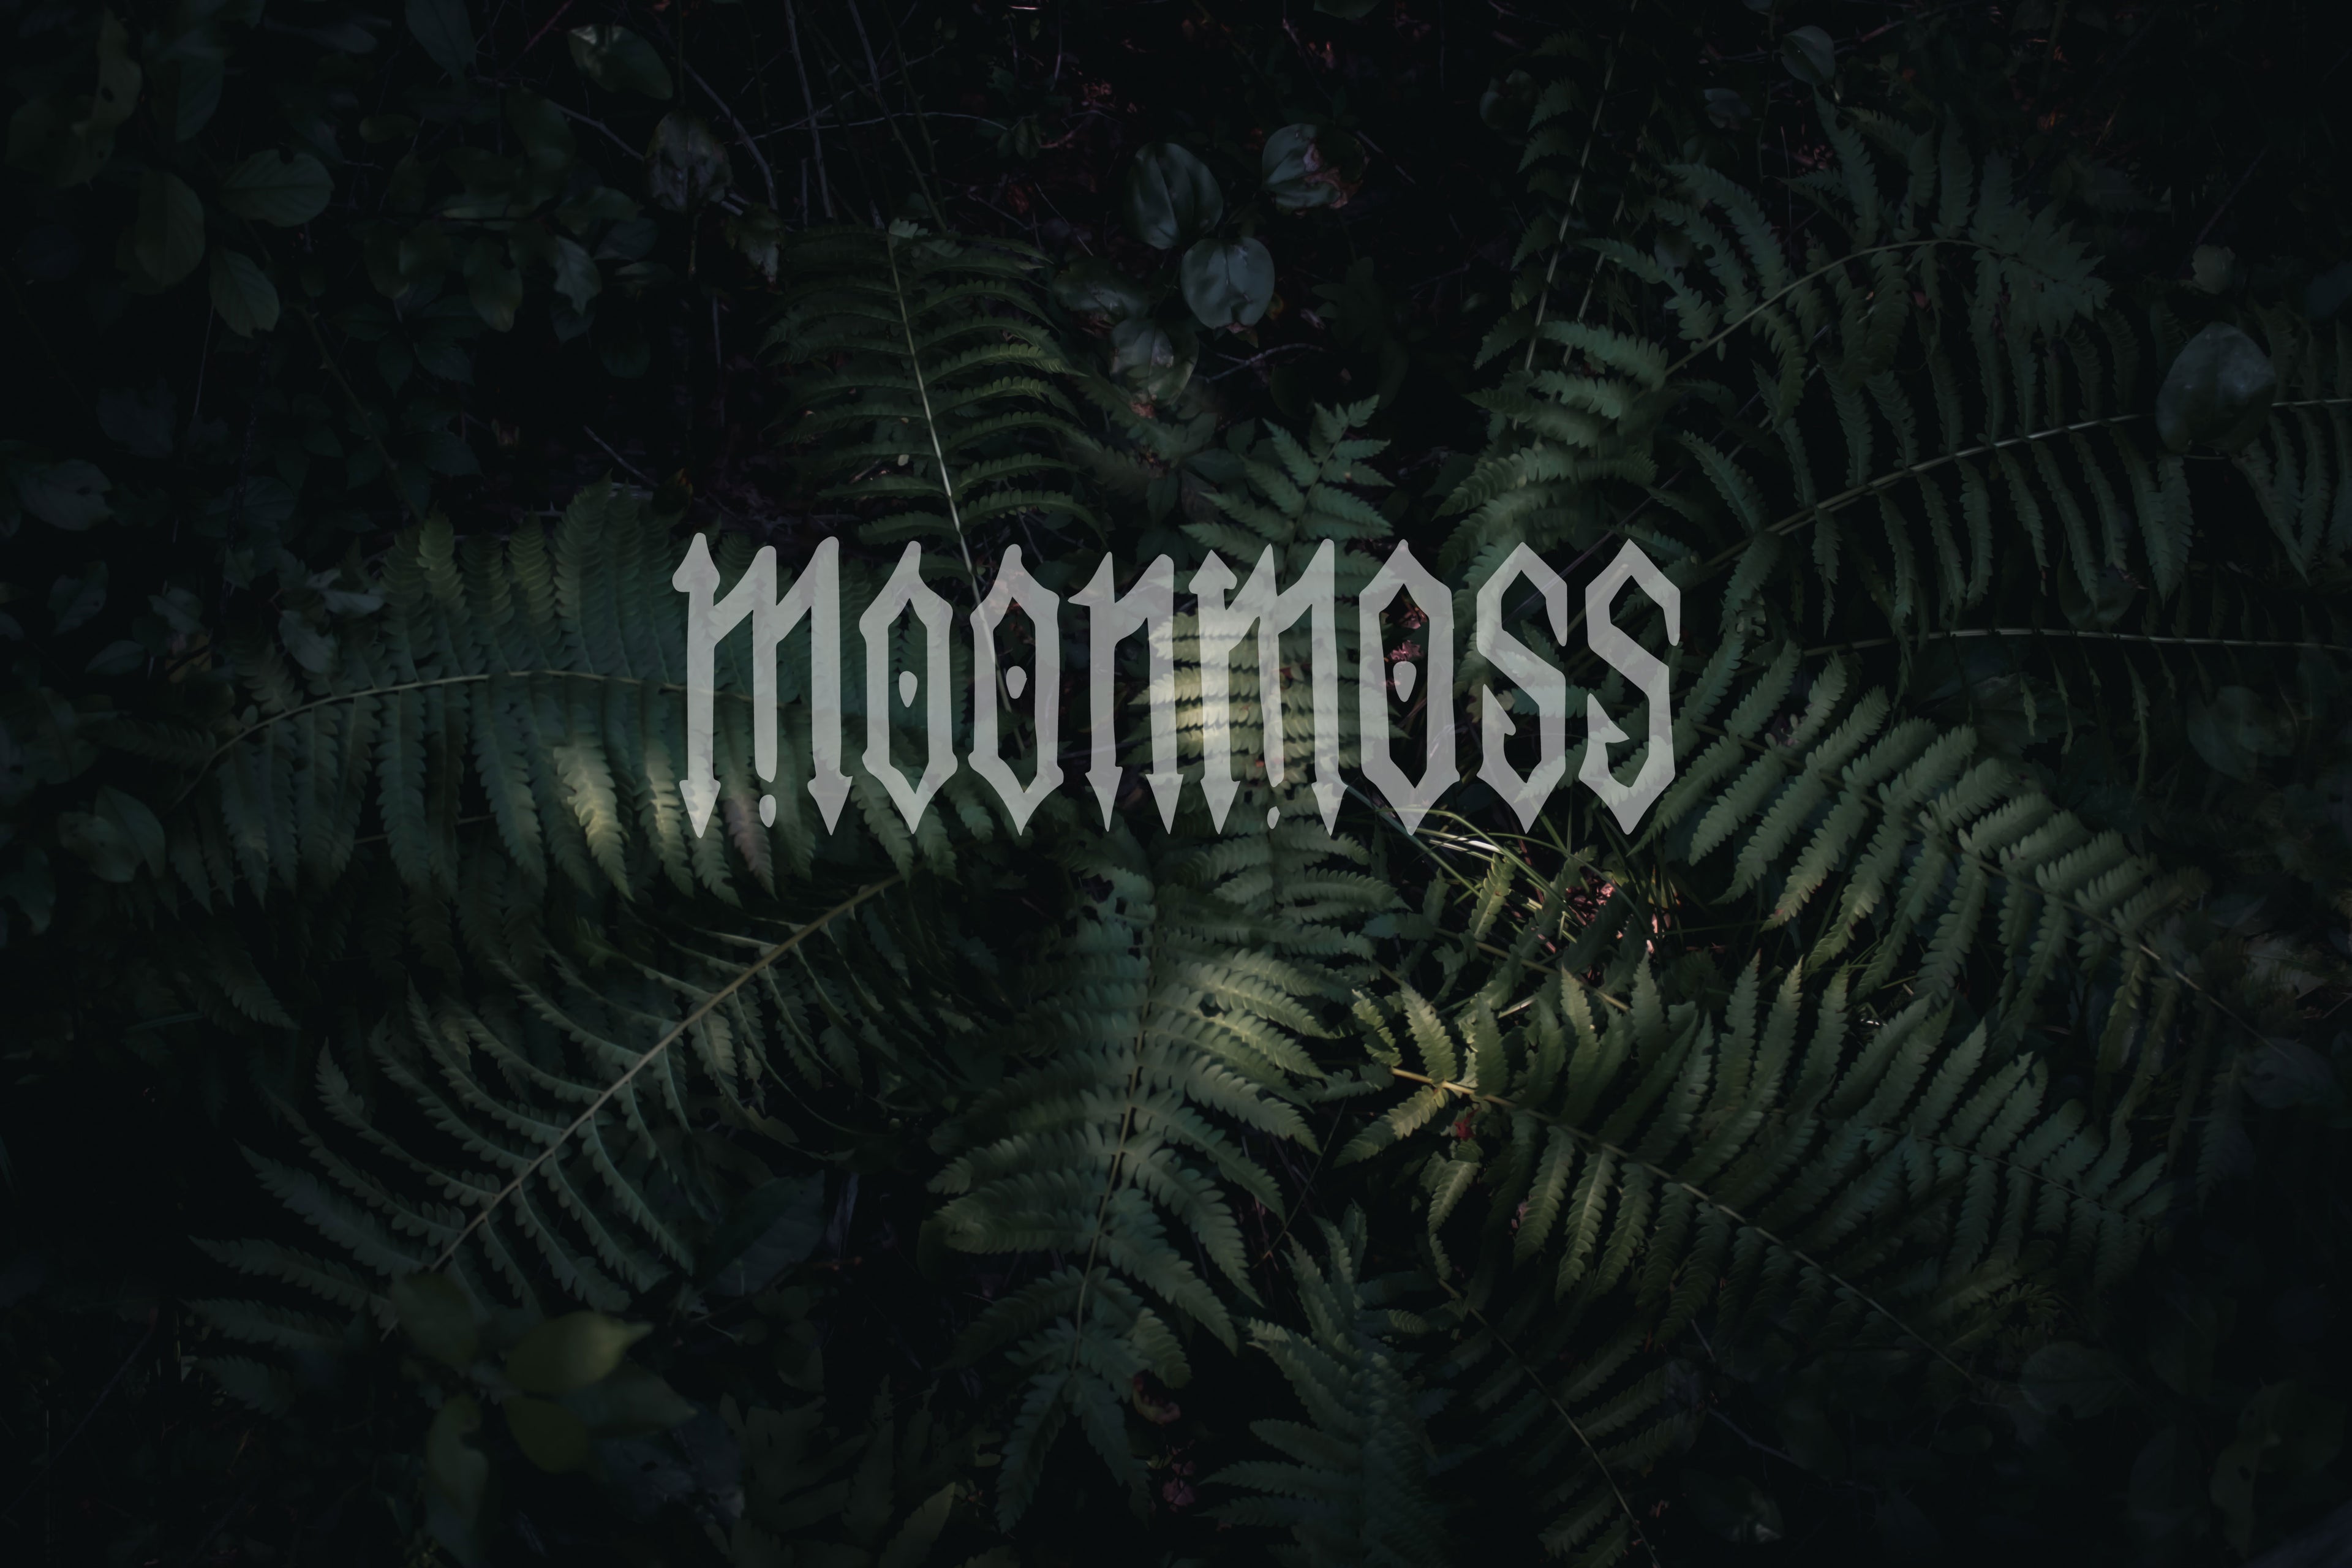 image of ferns with the word "moonmoss" in the center